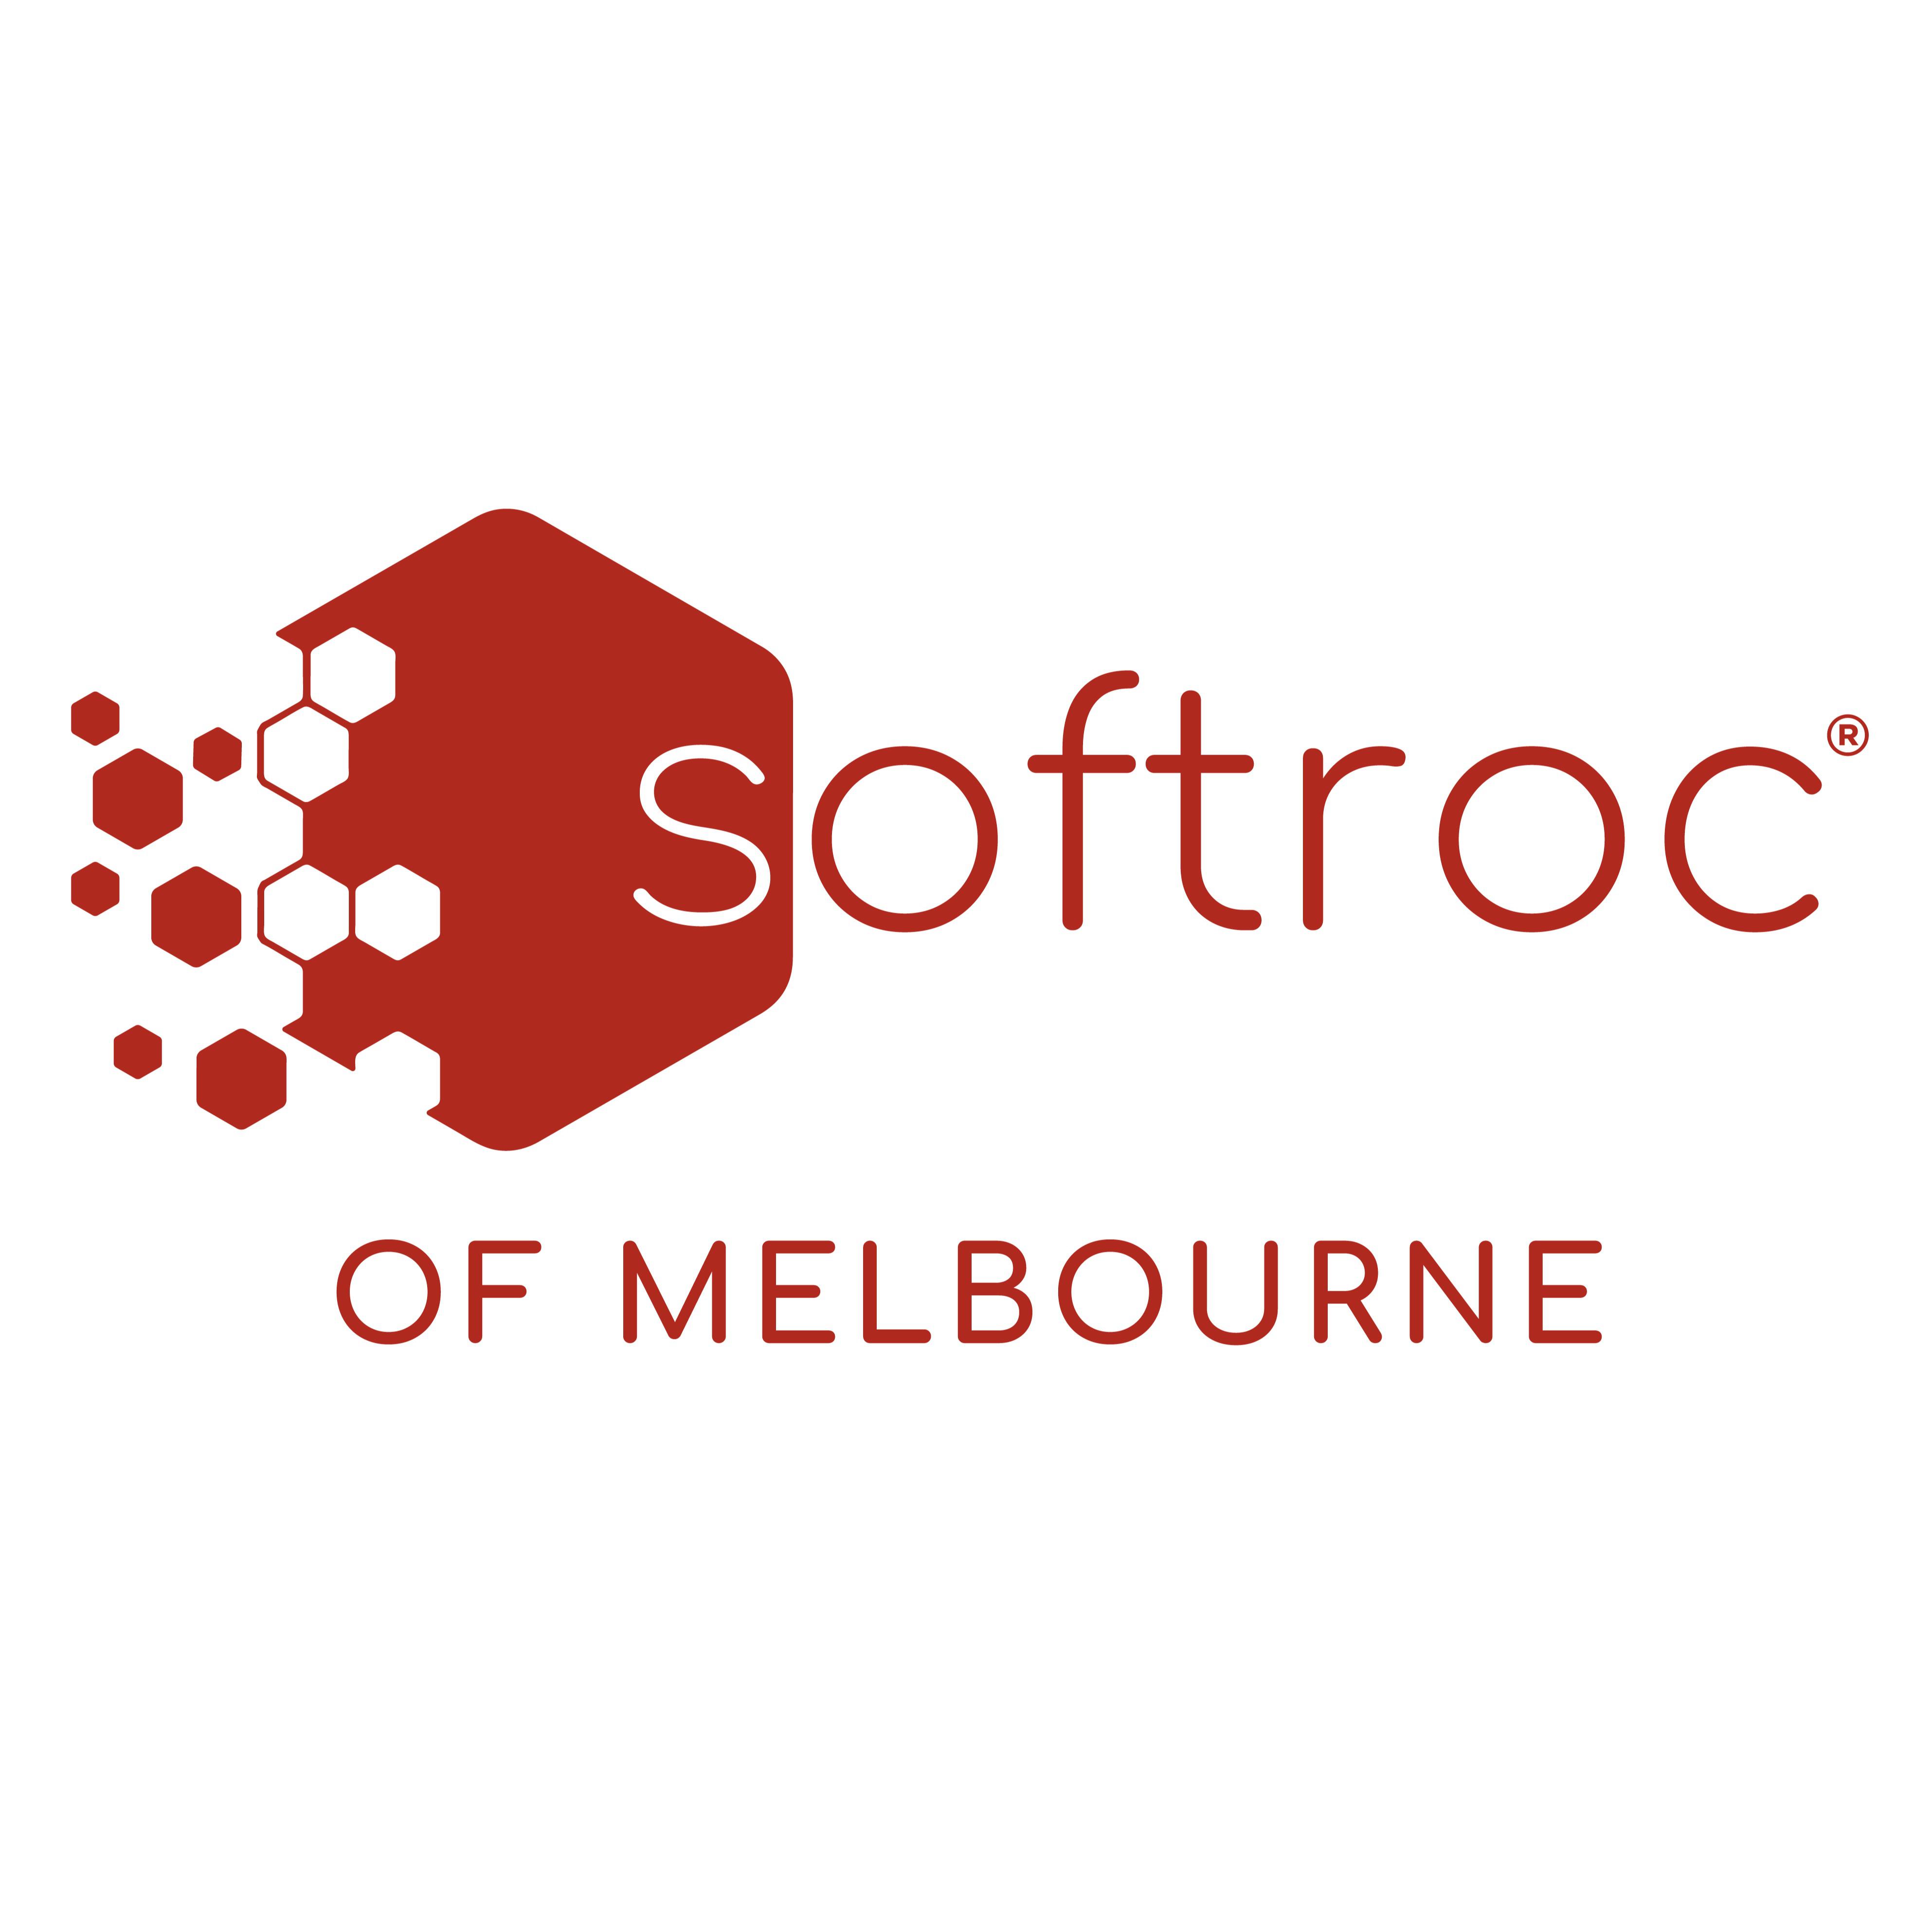 Softroc of Melbourne